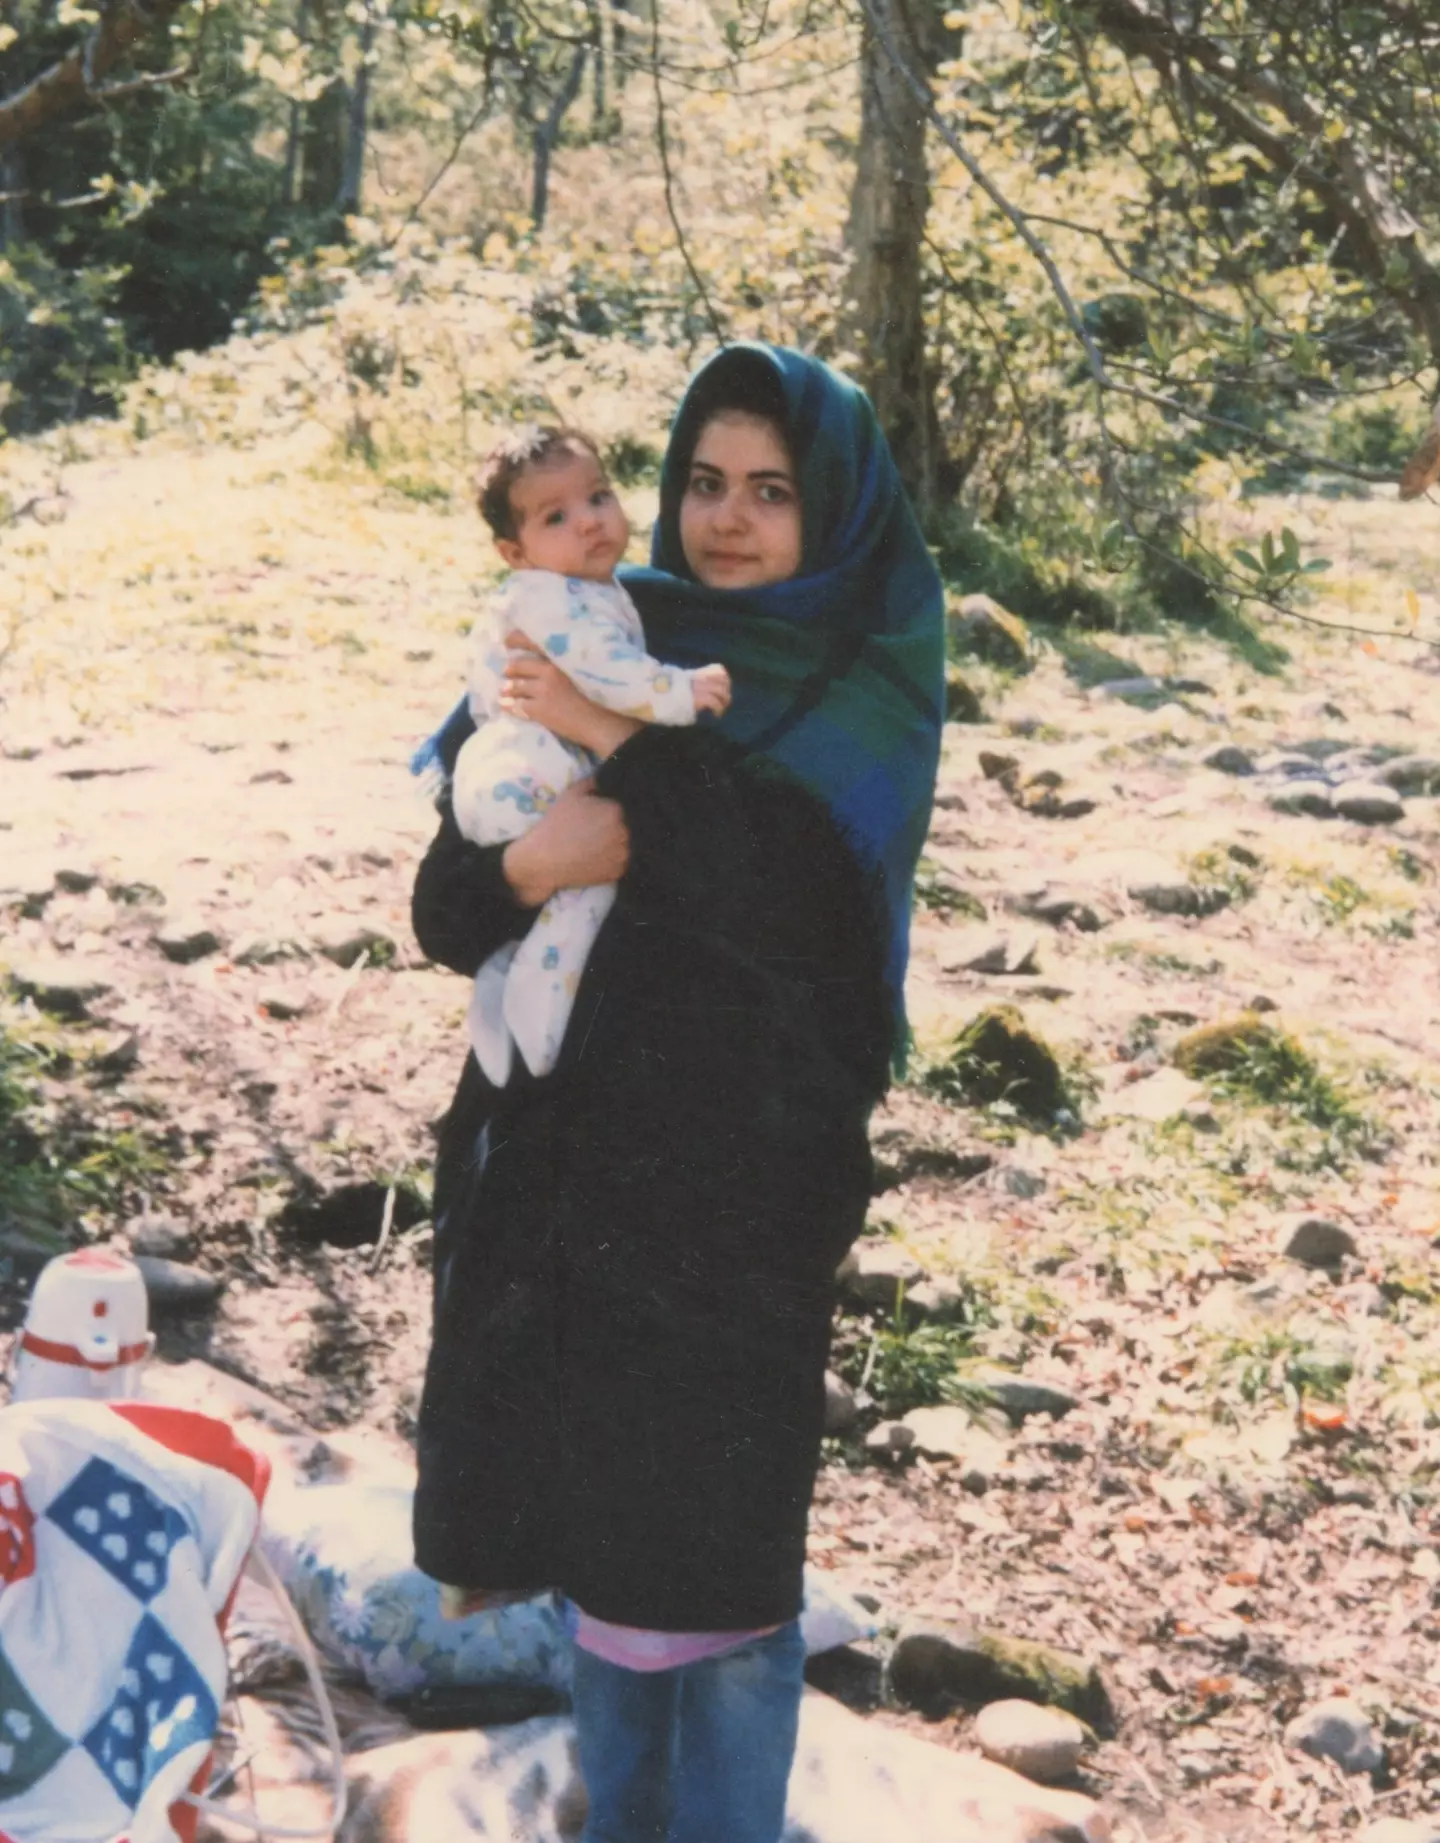 Sahar (pictured with her mother) grew up under Iran's strict Islamic regime in the 1990s.